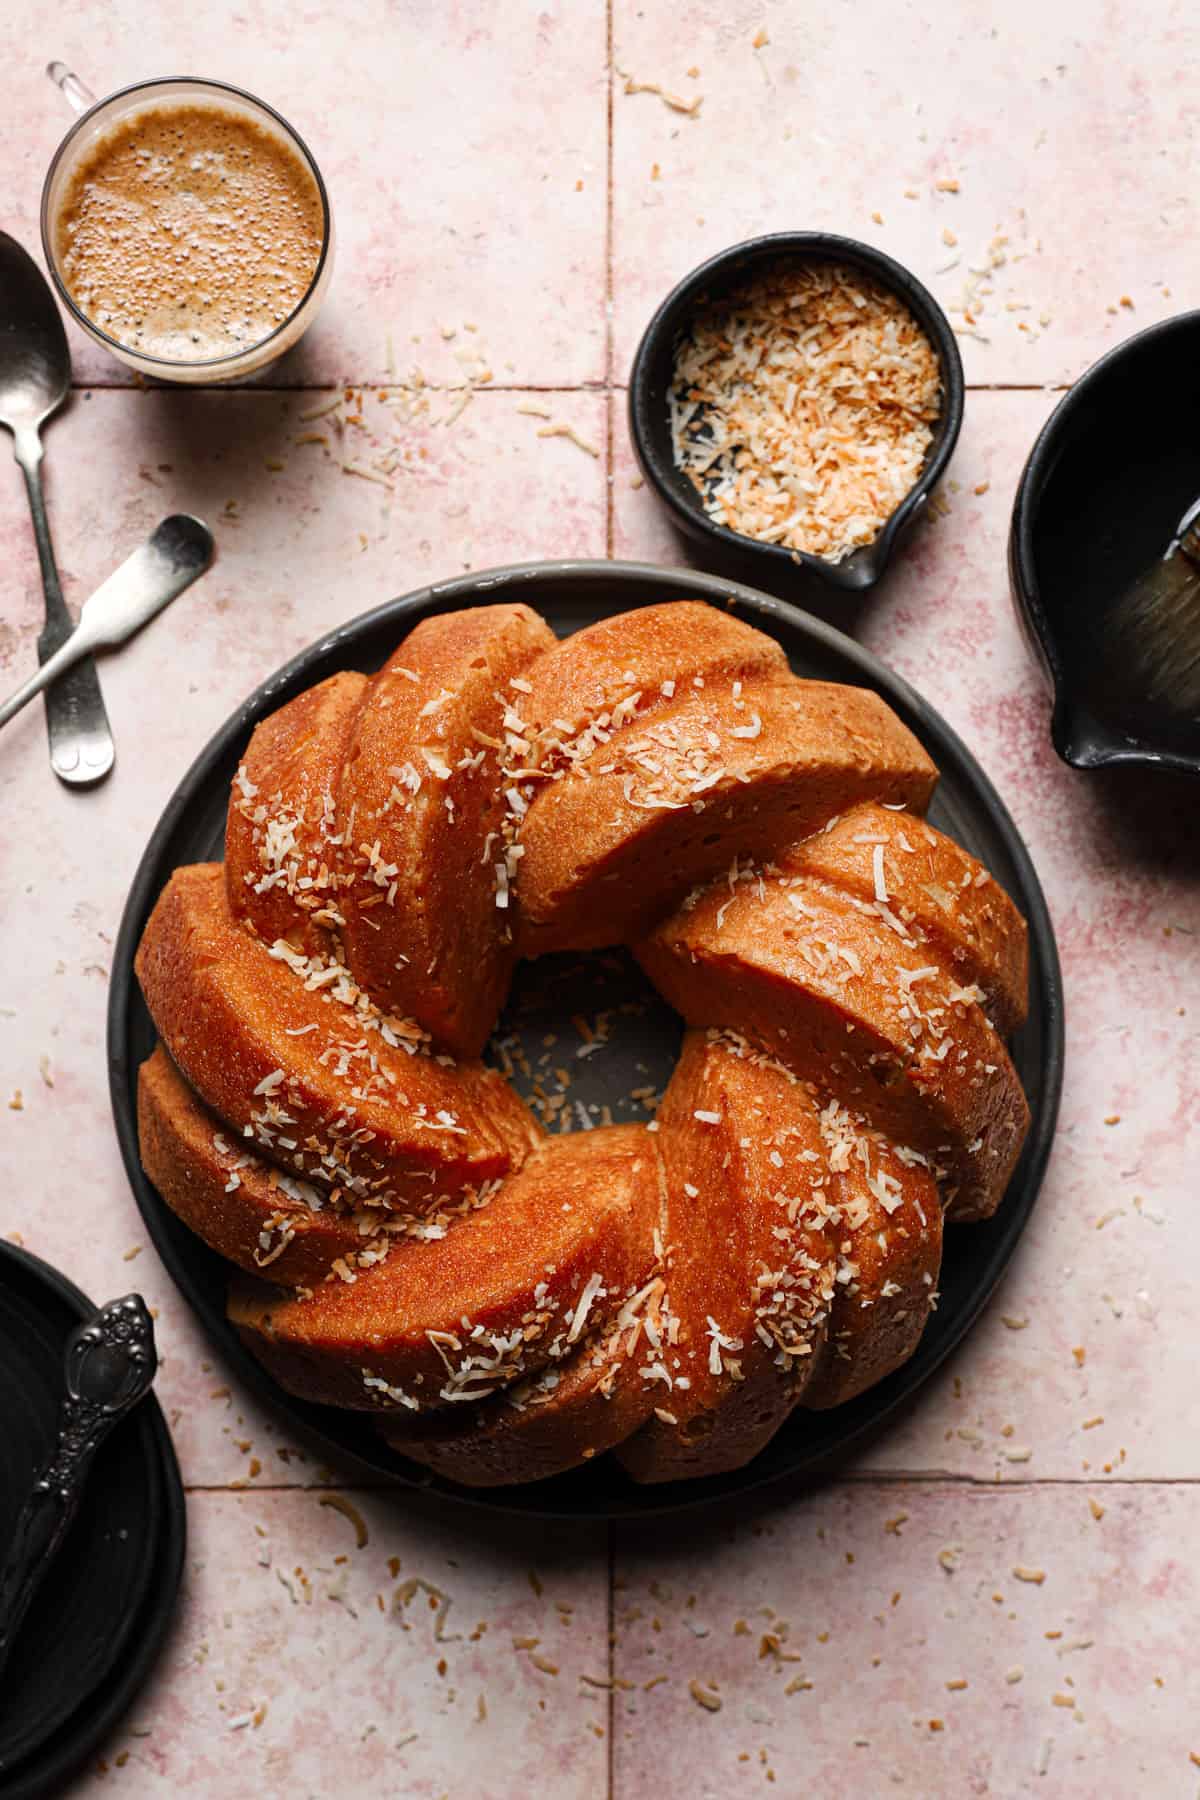 bundt pan in a plate sprinkled with shredded coconut